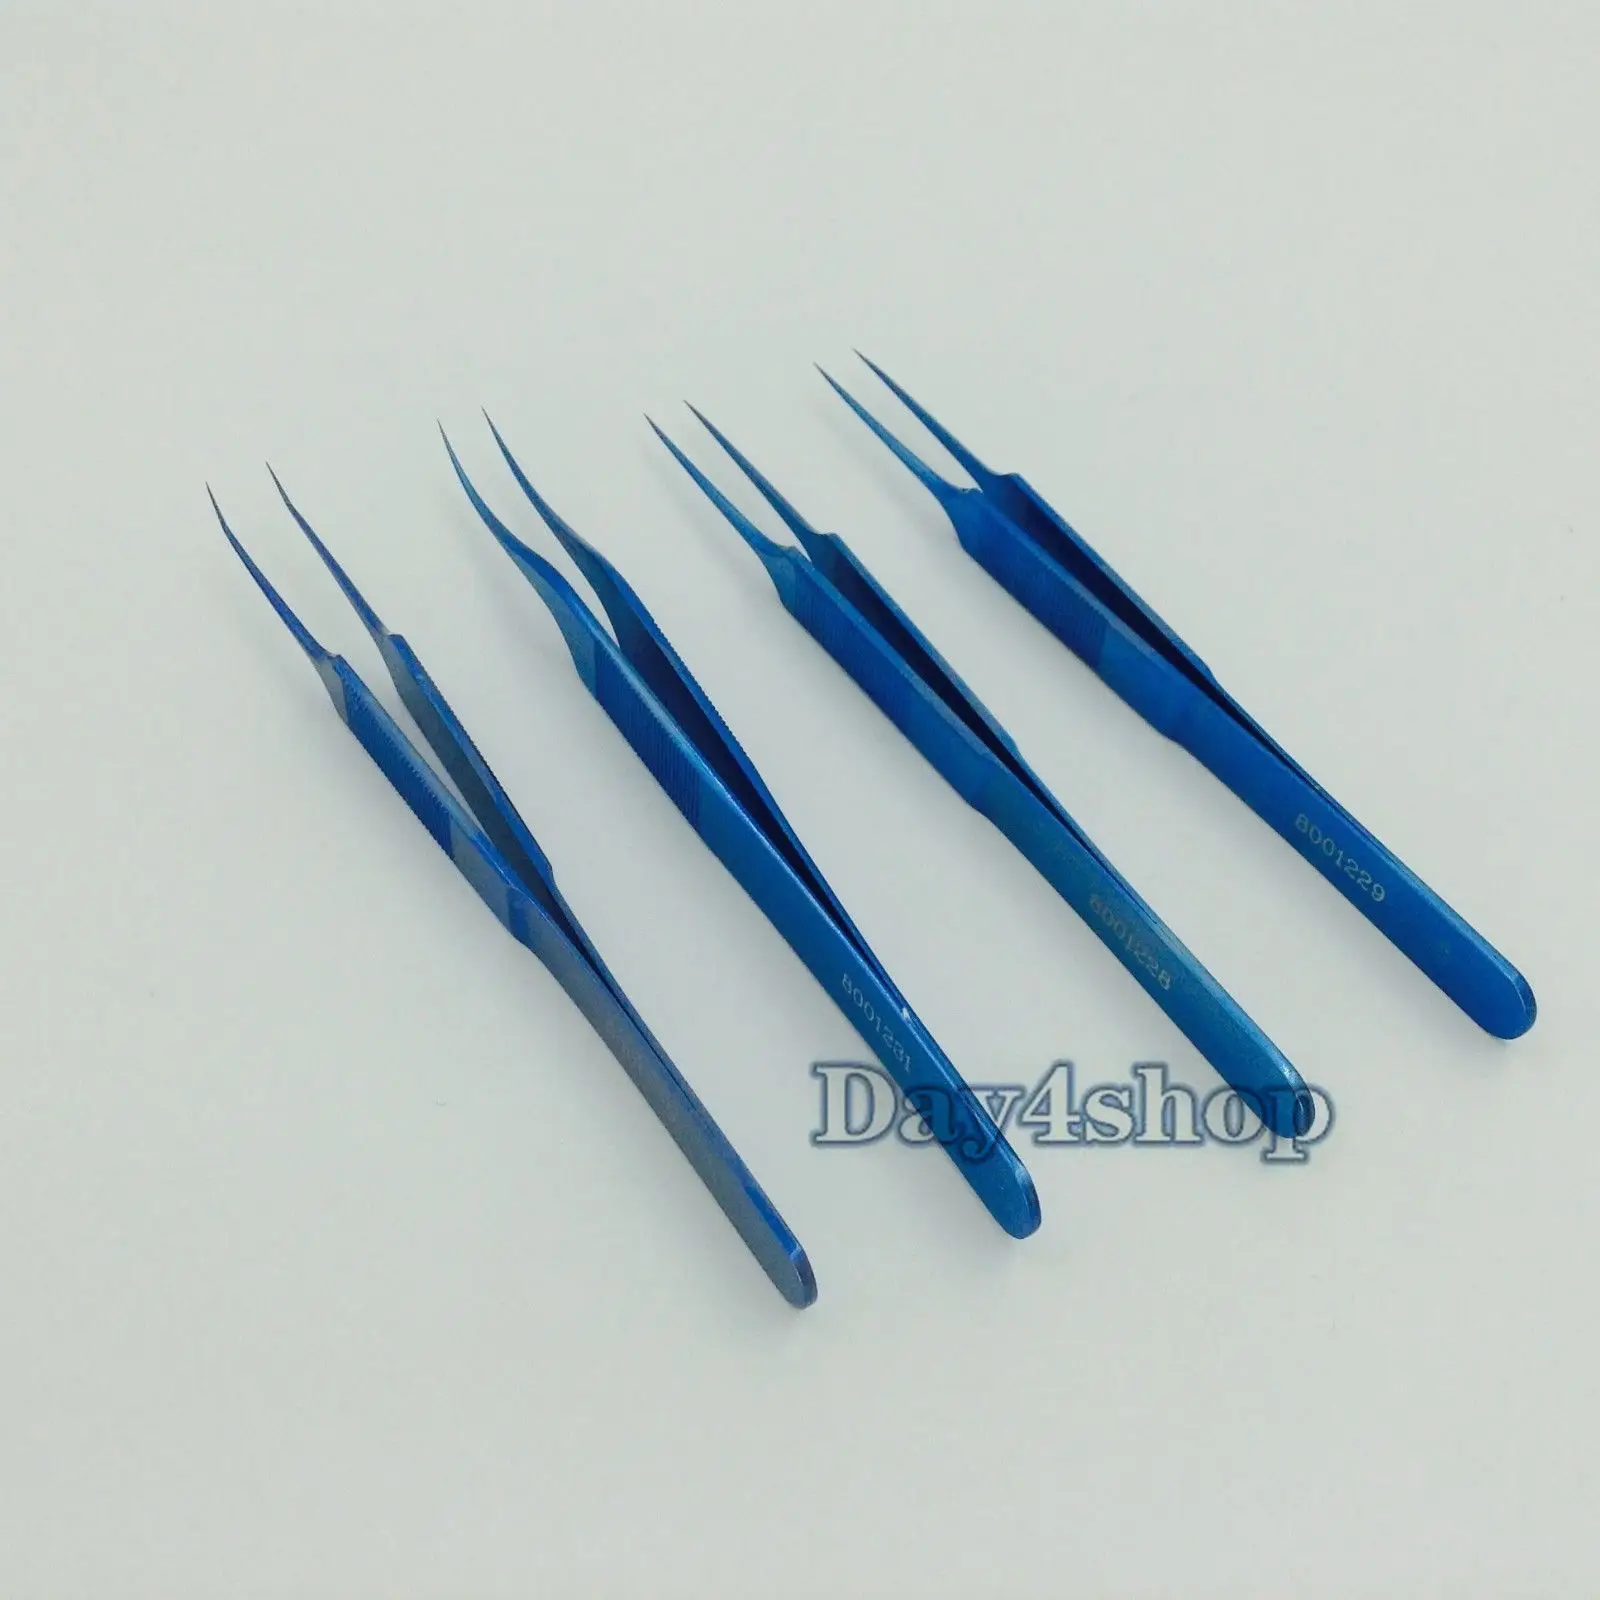 BEST New 4pcs/set different Jeweler Style Forceps ophthamic surgical instruments